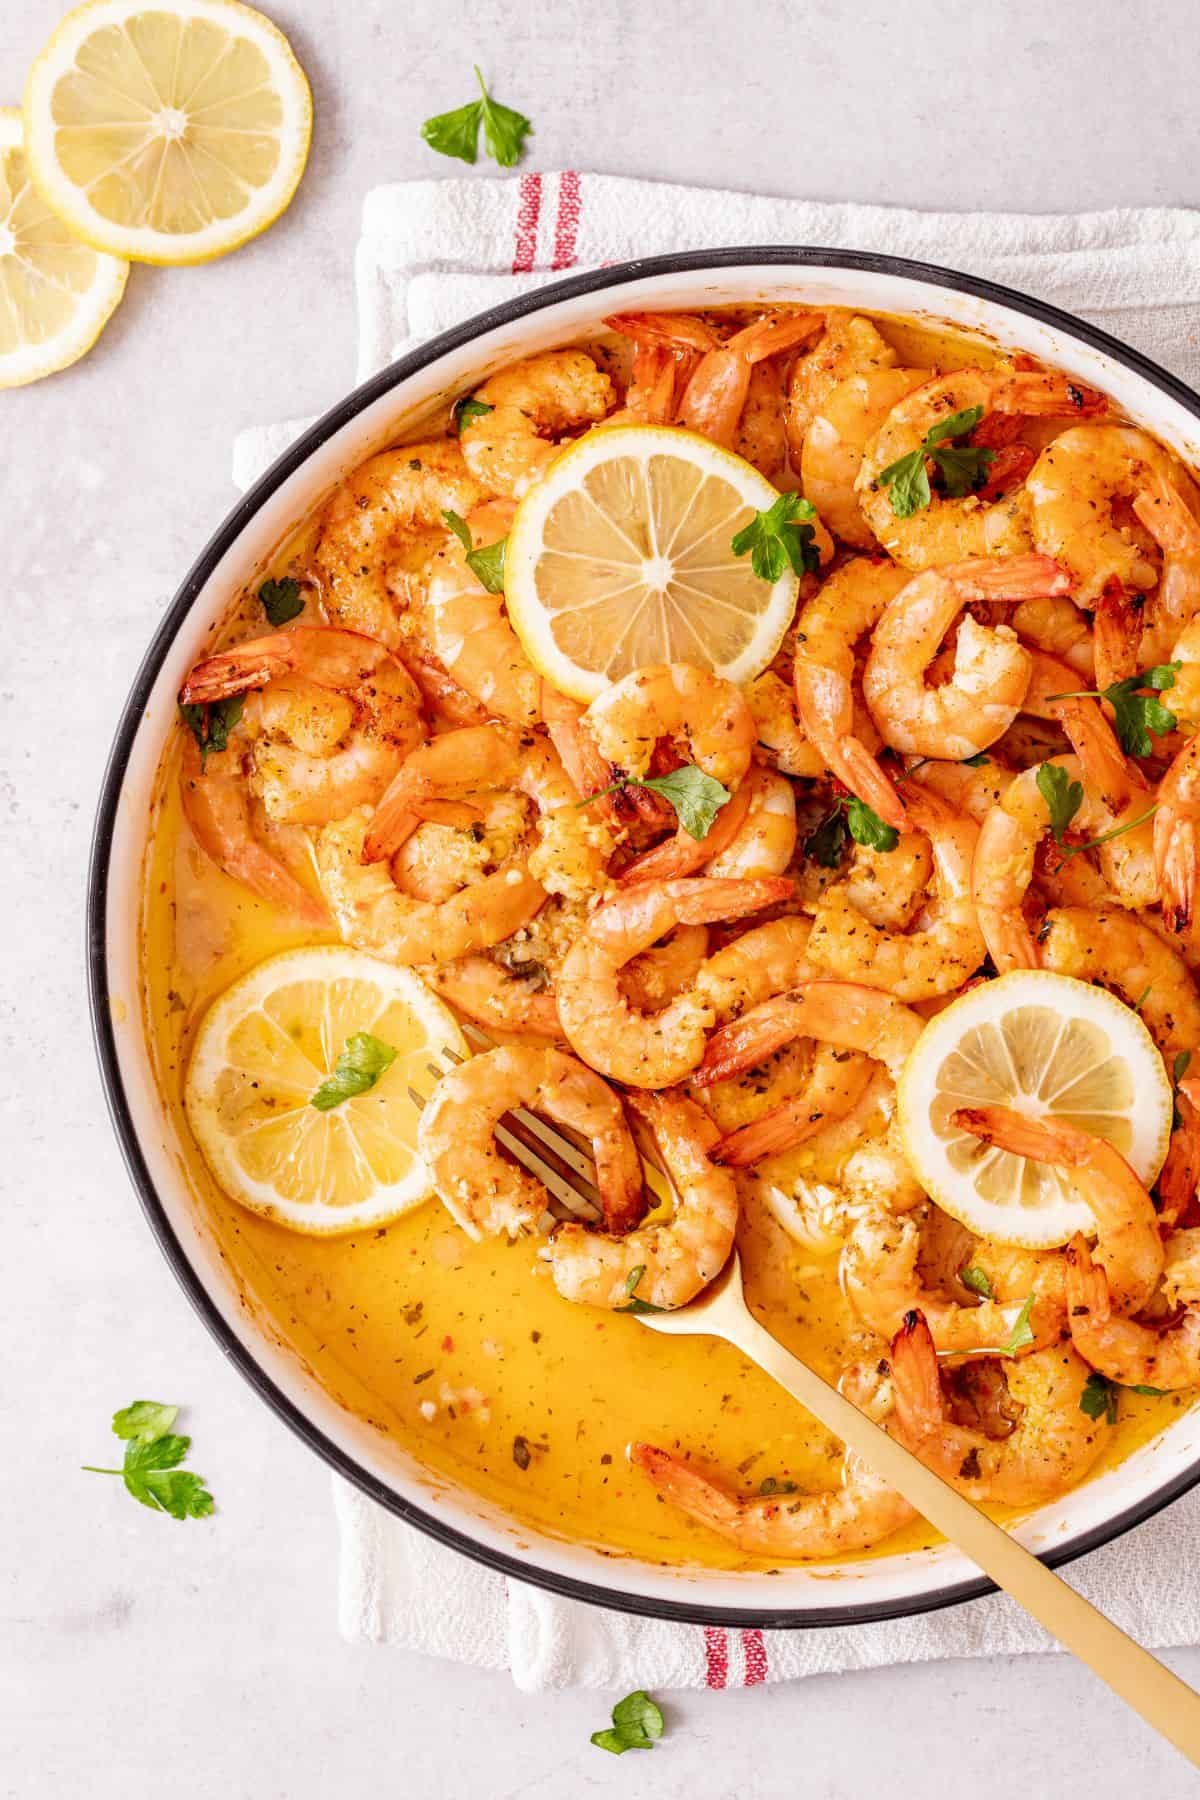 baked shrimp topped with slices of lemon on a plate